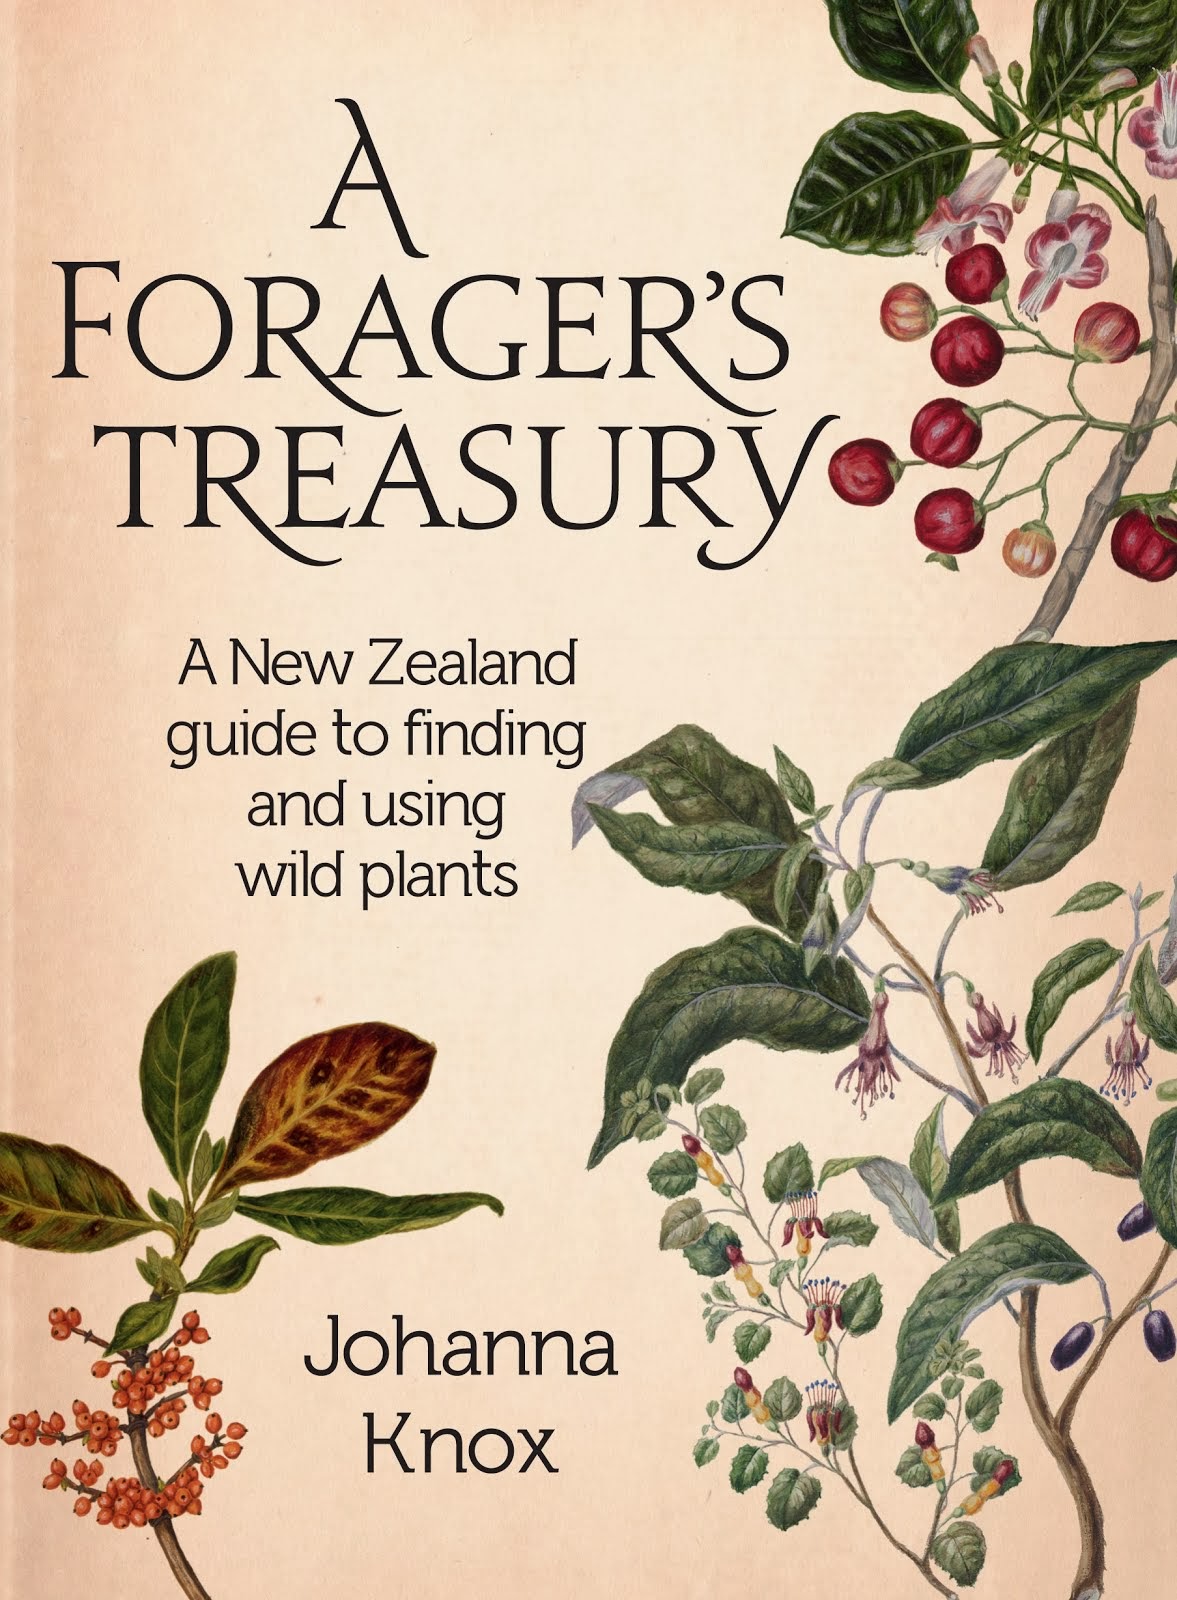 A Forager's Treasury